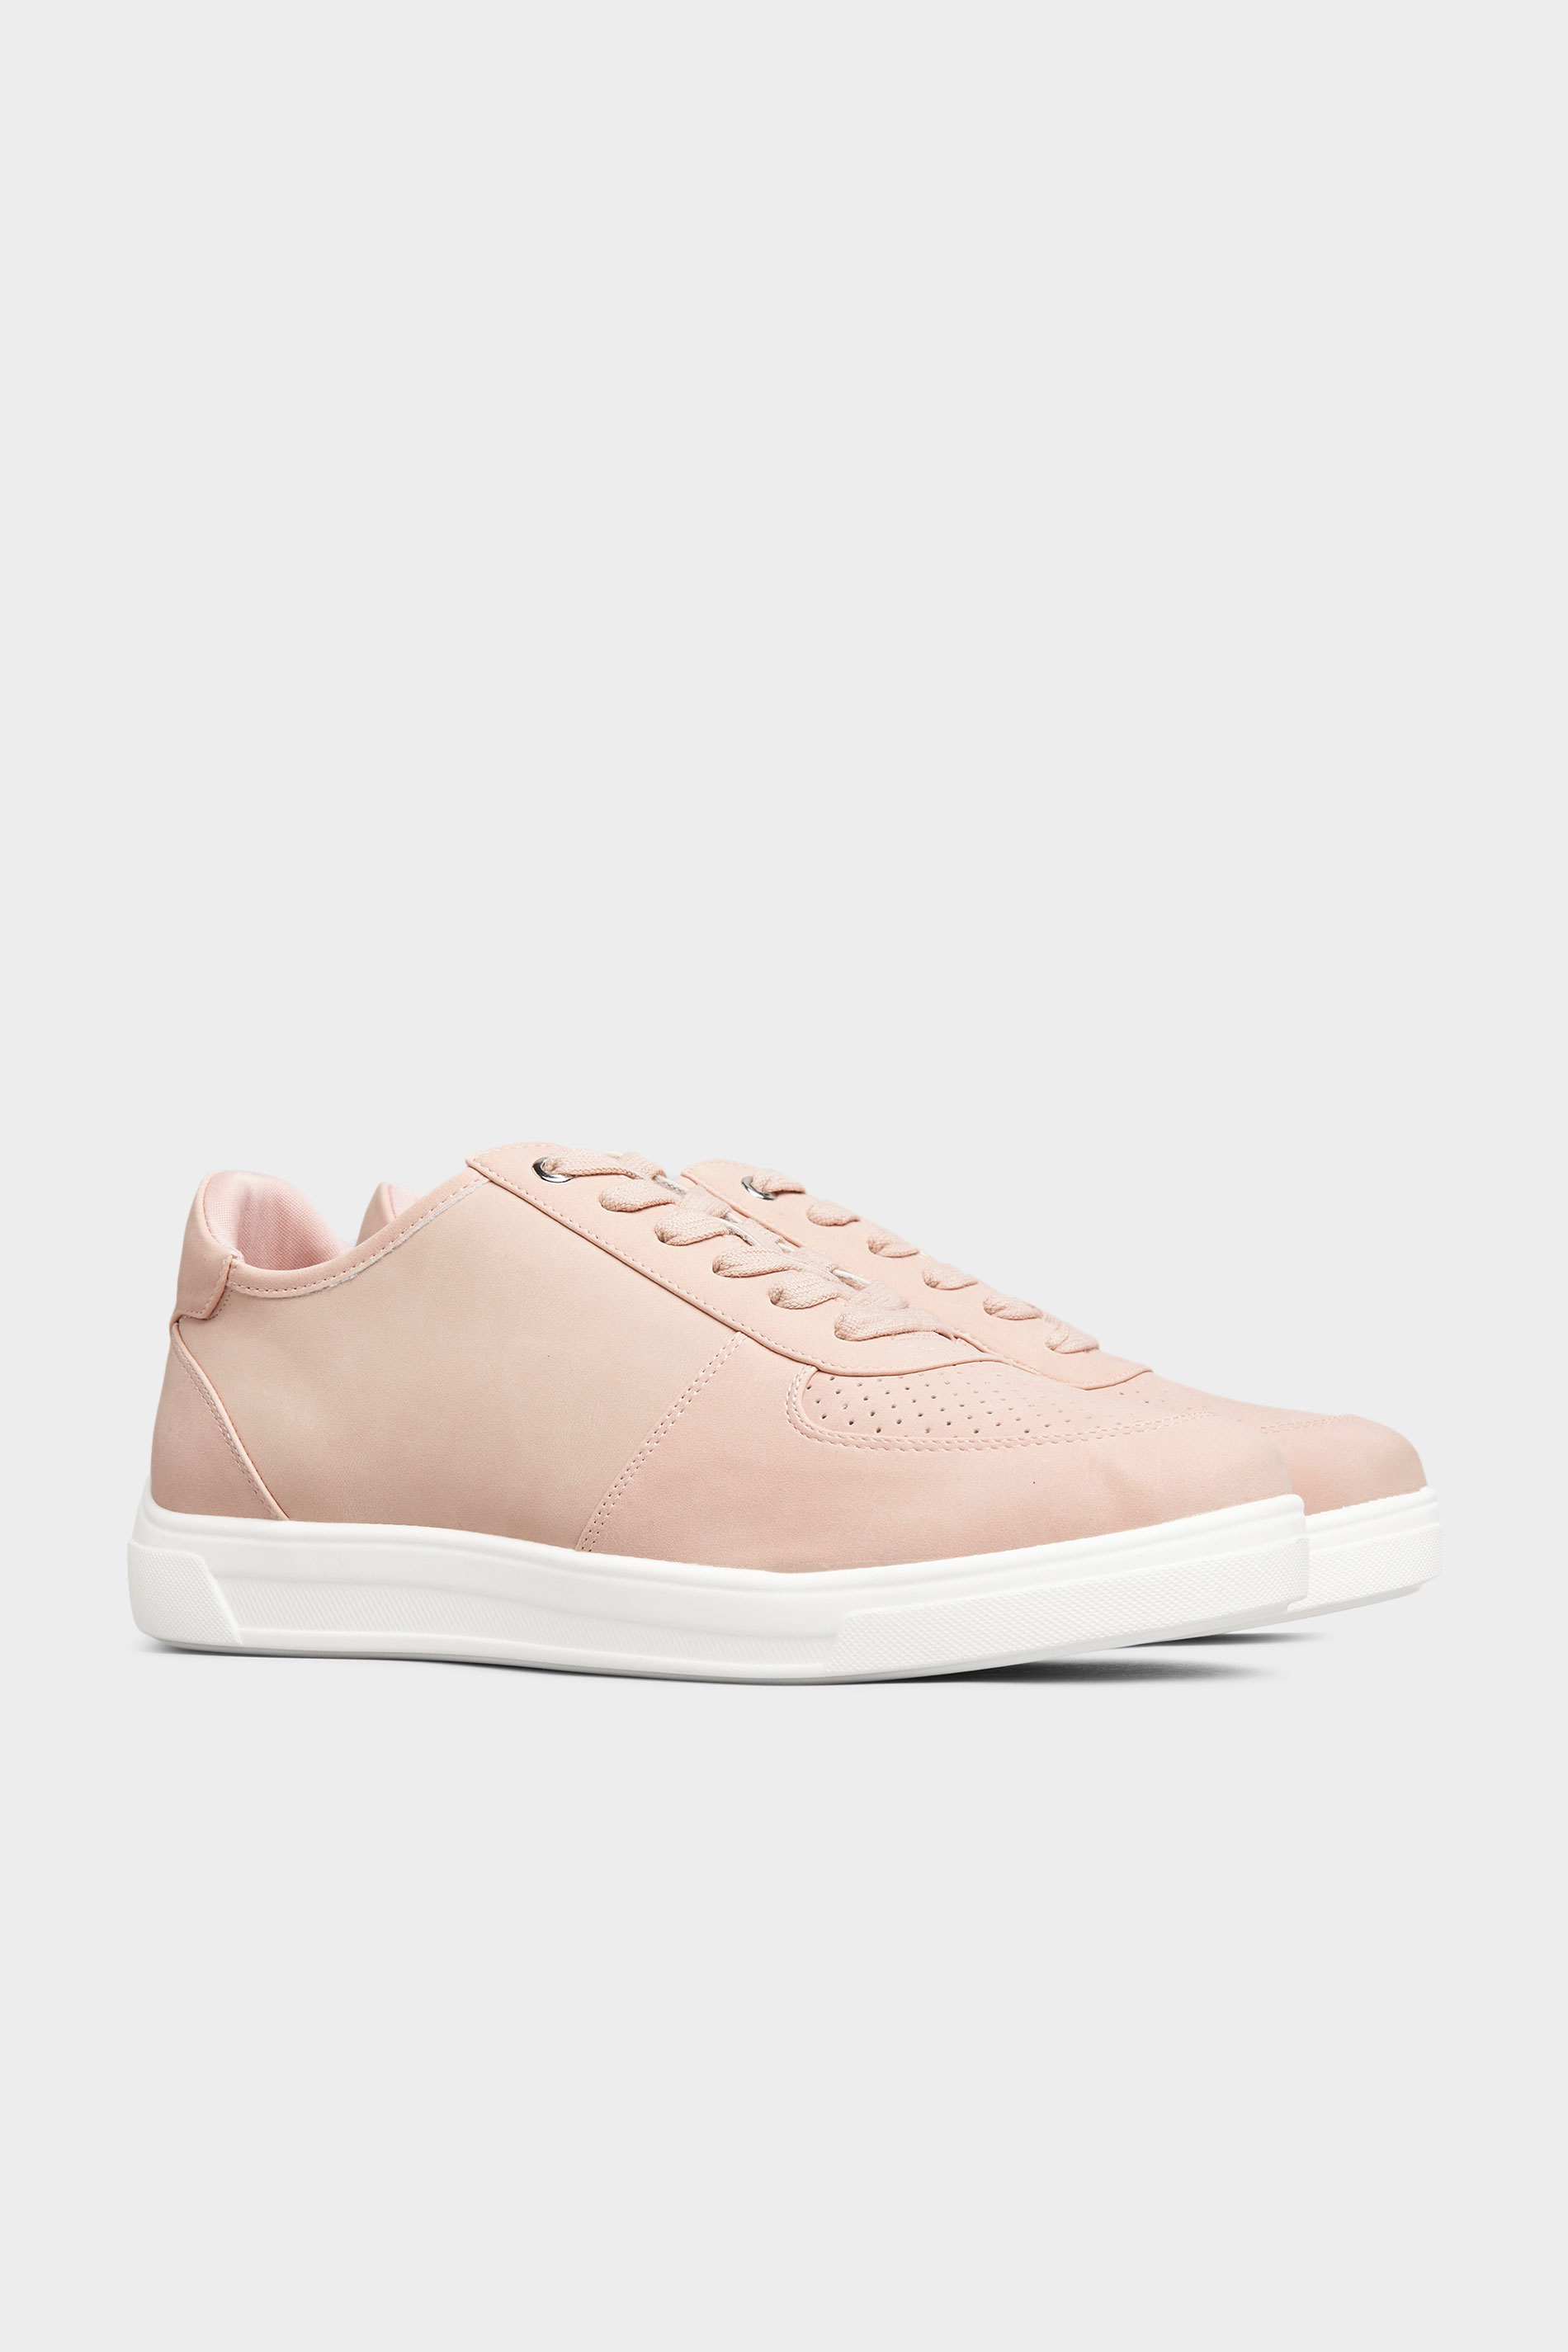 Pink Vegan Leather Lace Up Trainers In Extra Wide Fit_B.jpg